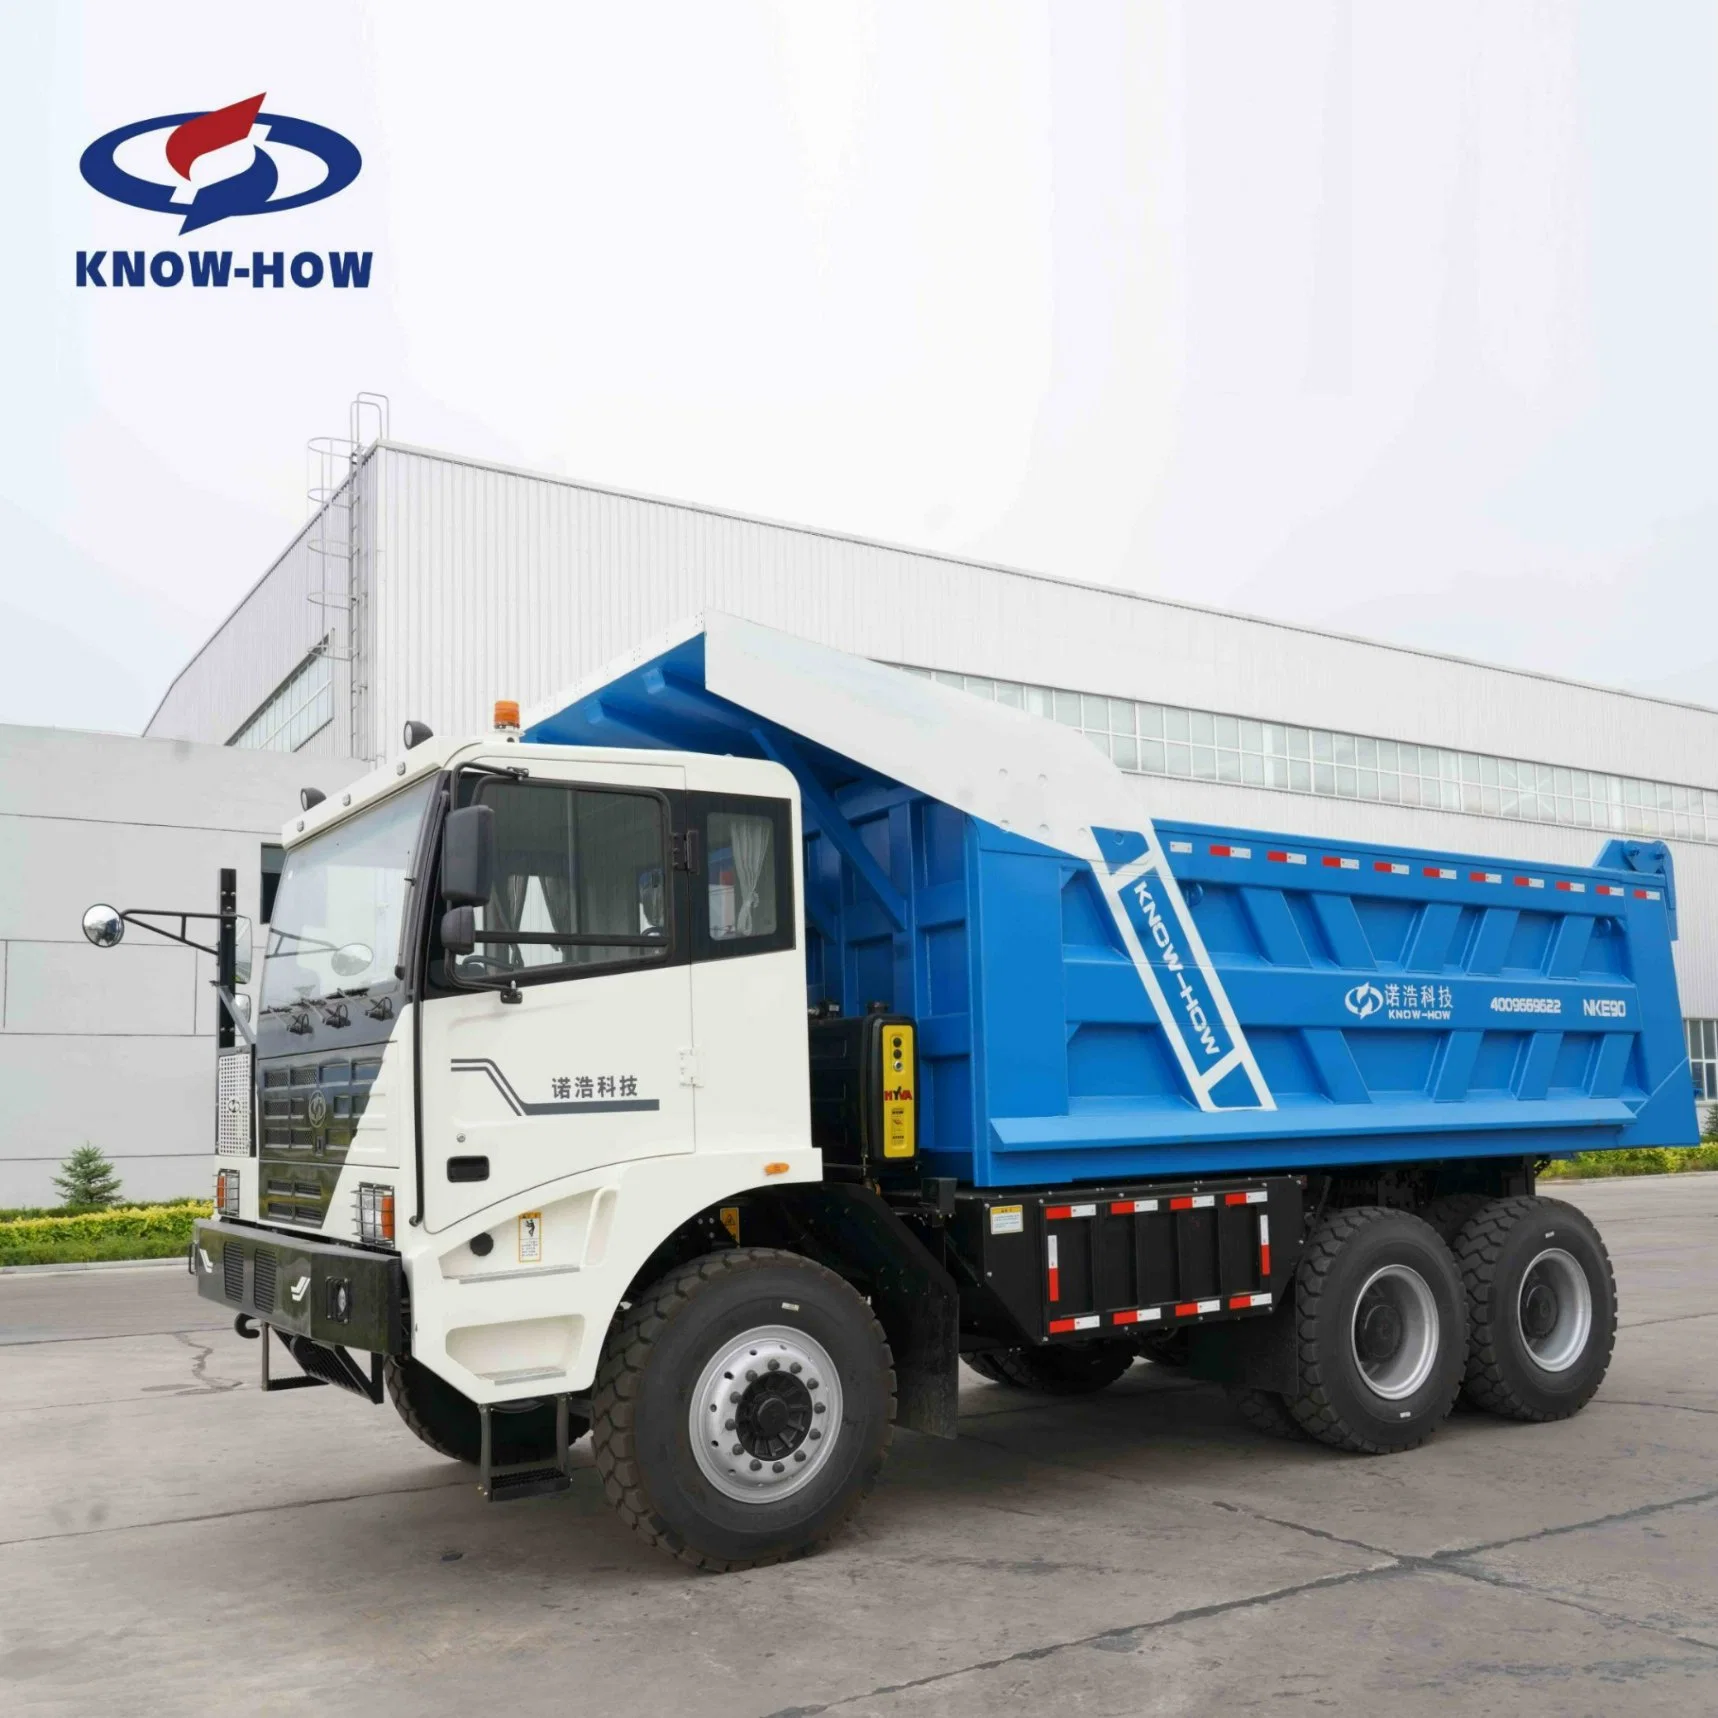 90 Tons Loading Weight 350kwh Electric Battery Motor Mining Dump Truck Tipper with Advanced Electronic Control System Quickly Charging Battery for Spare Parts